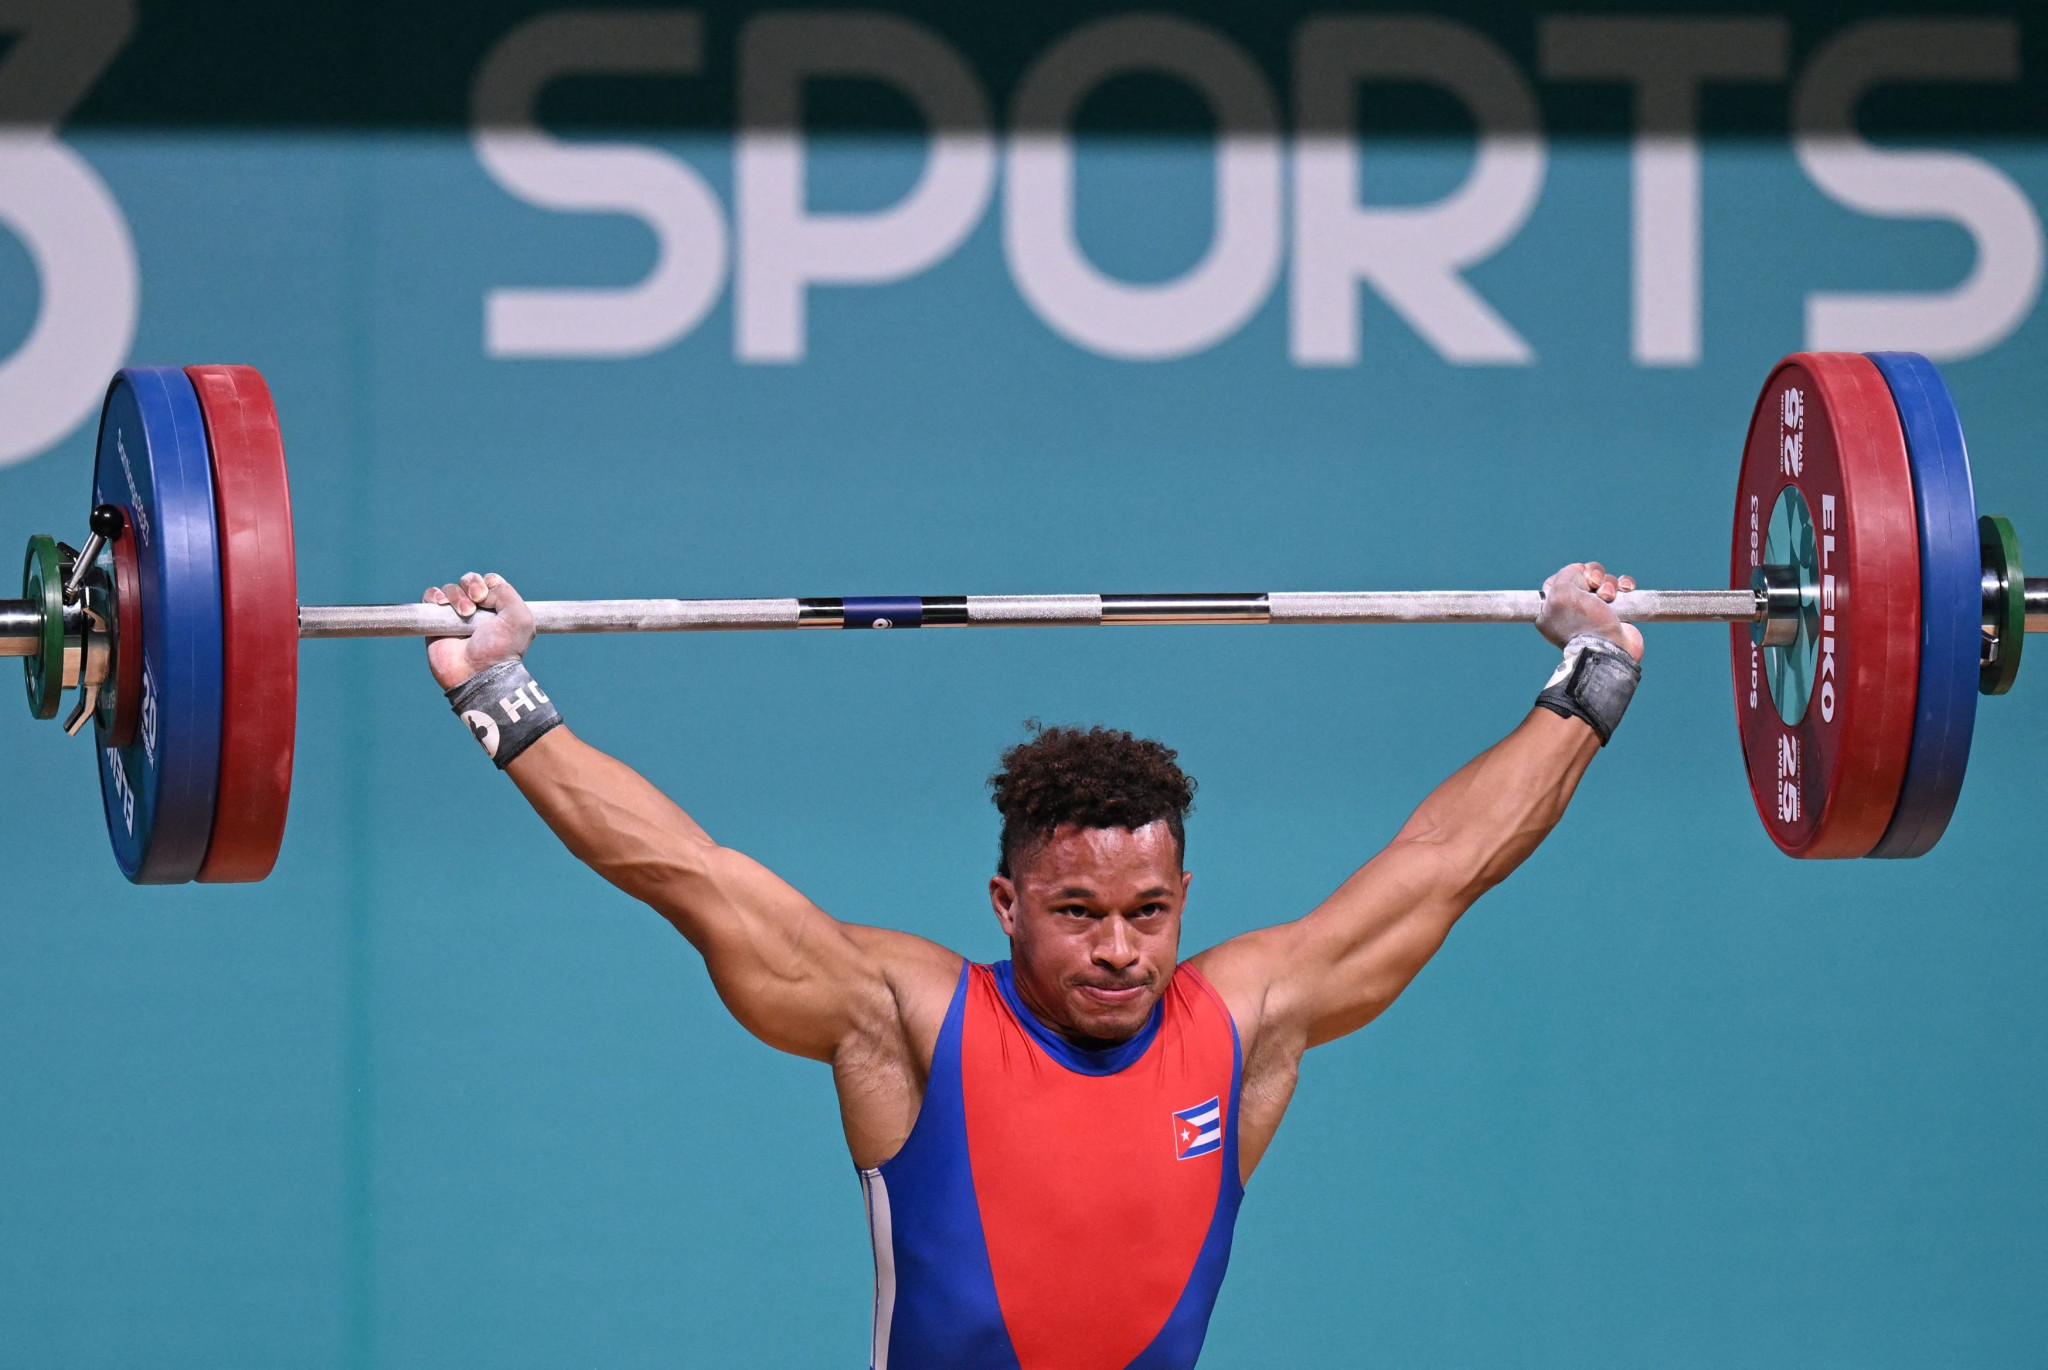 Cuban weightlifter Arley Calderón proved too strong as he claimed the men’s 61kg title ©Getty Images